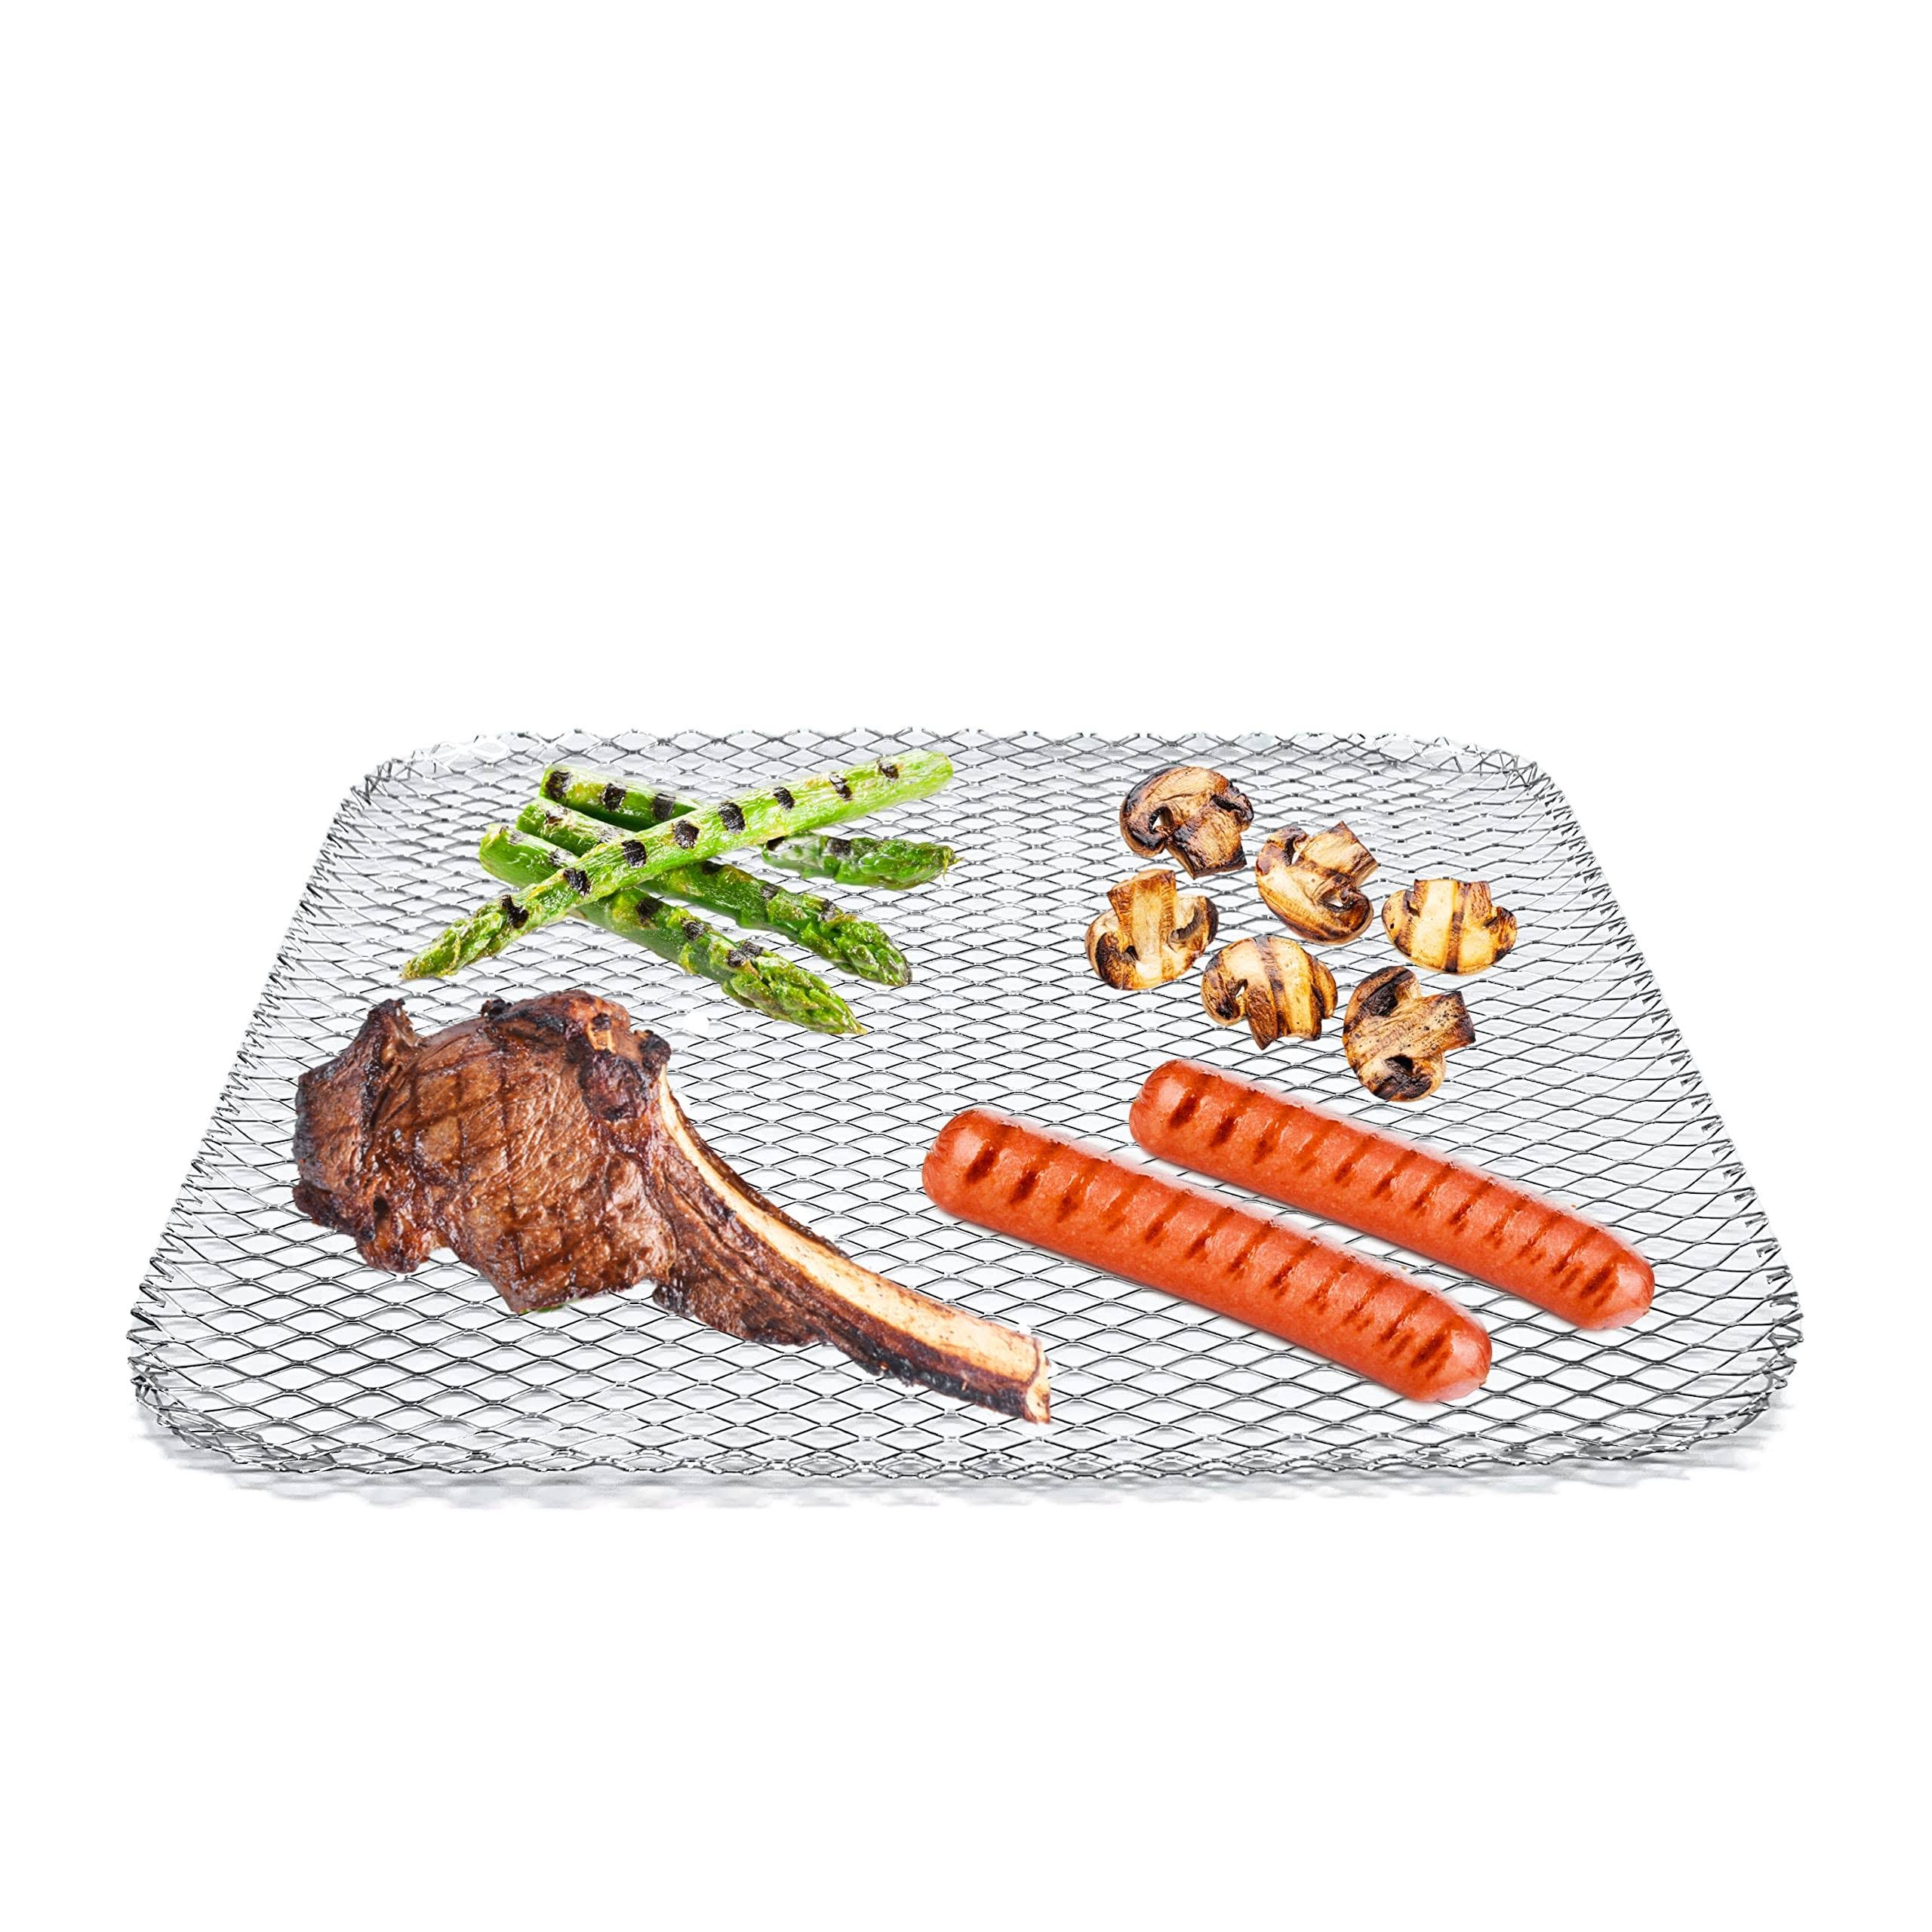 Non-Stick Grill Mats for BBQ Food Safety and Hygiene | Image